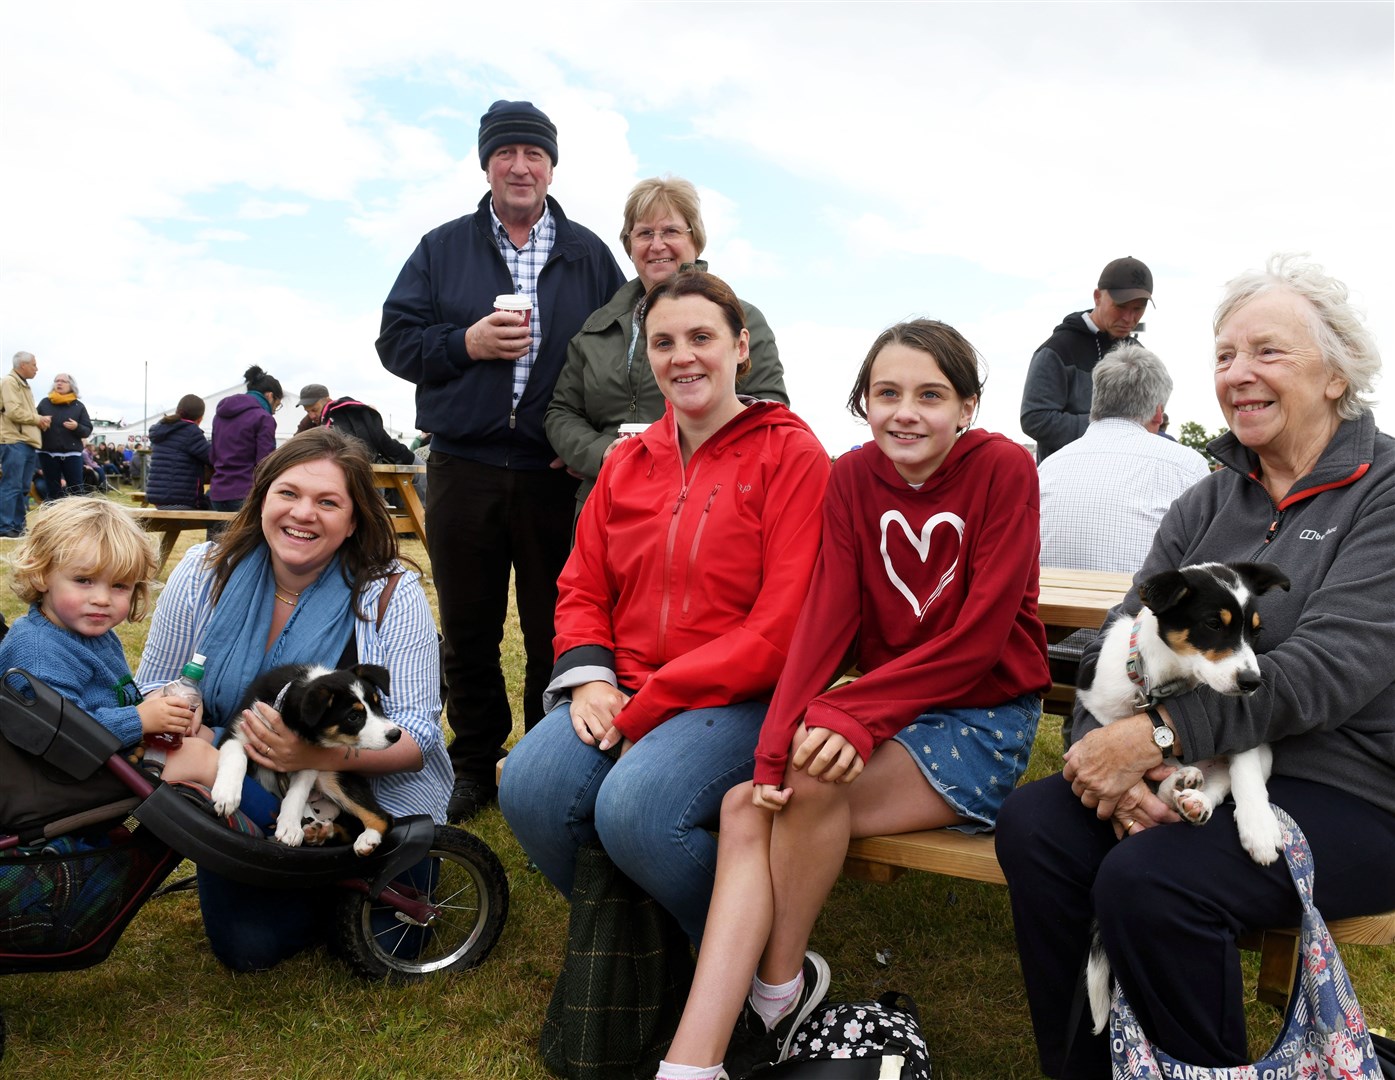 Seonaidh and Rebecca Murdoch, Dram the border collie, Norman and Janet Murdoch, Joanne and Kayla Gallimore, Betty Draper and Dot the border collie. Picture: James Mackenzie.